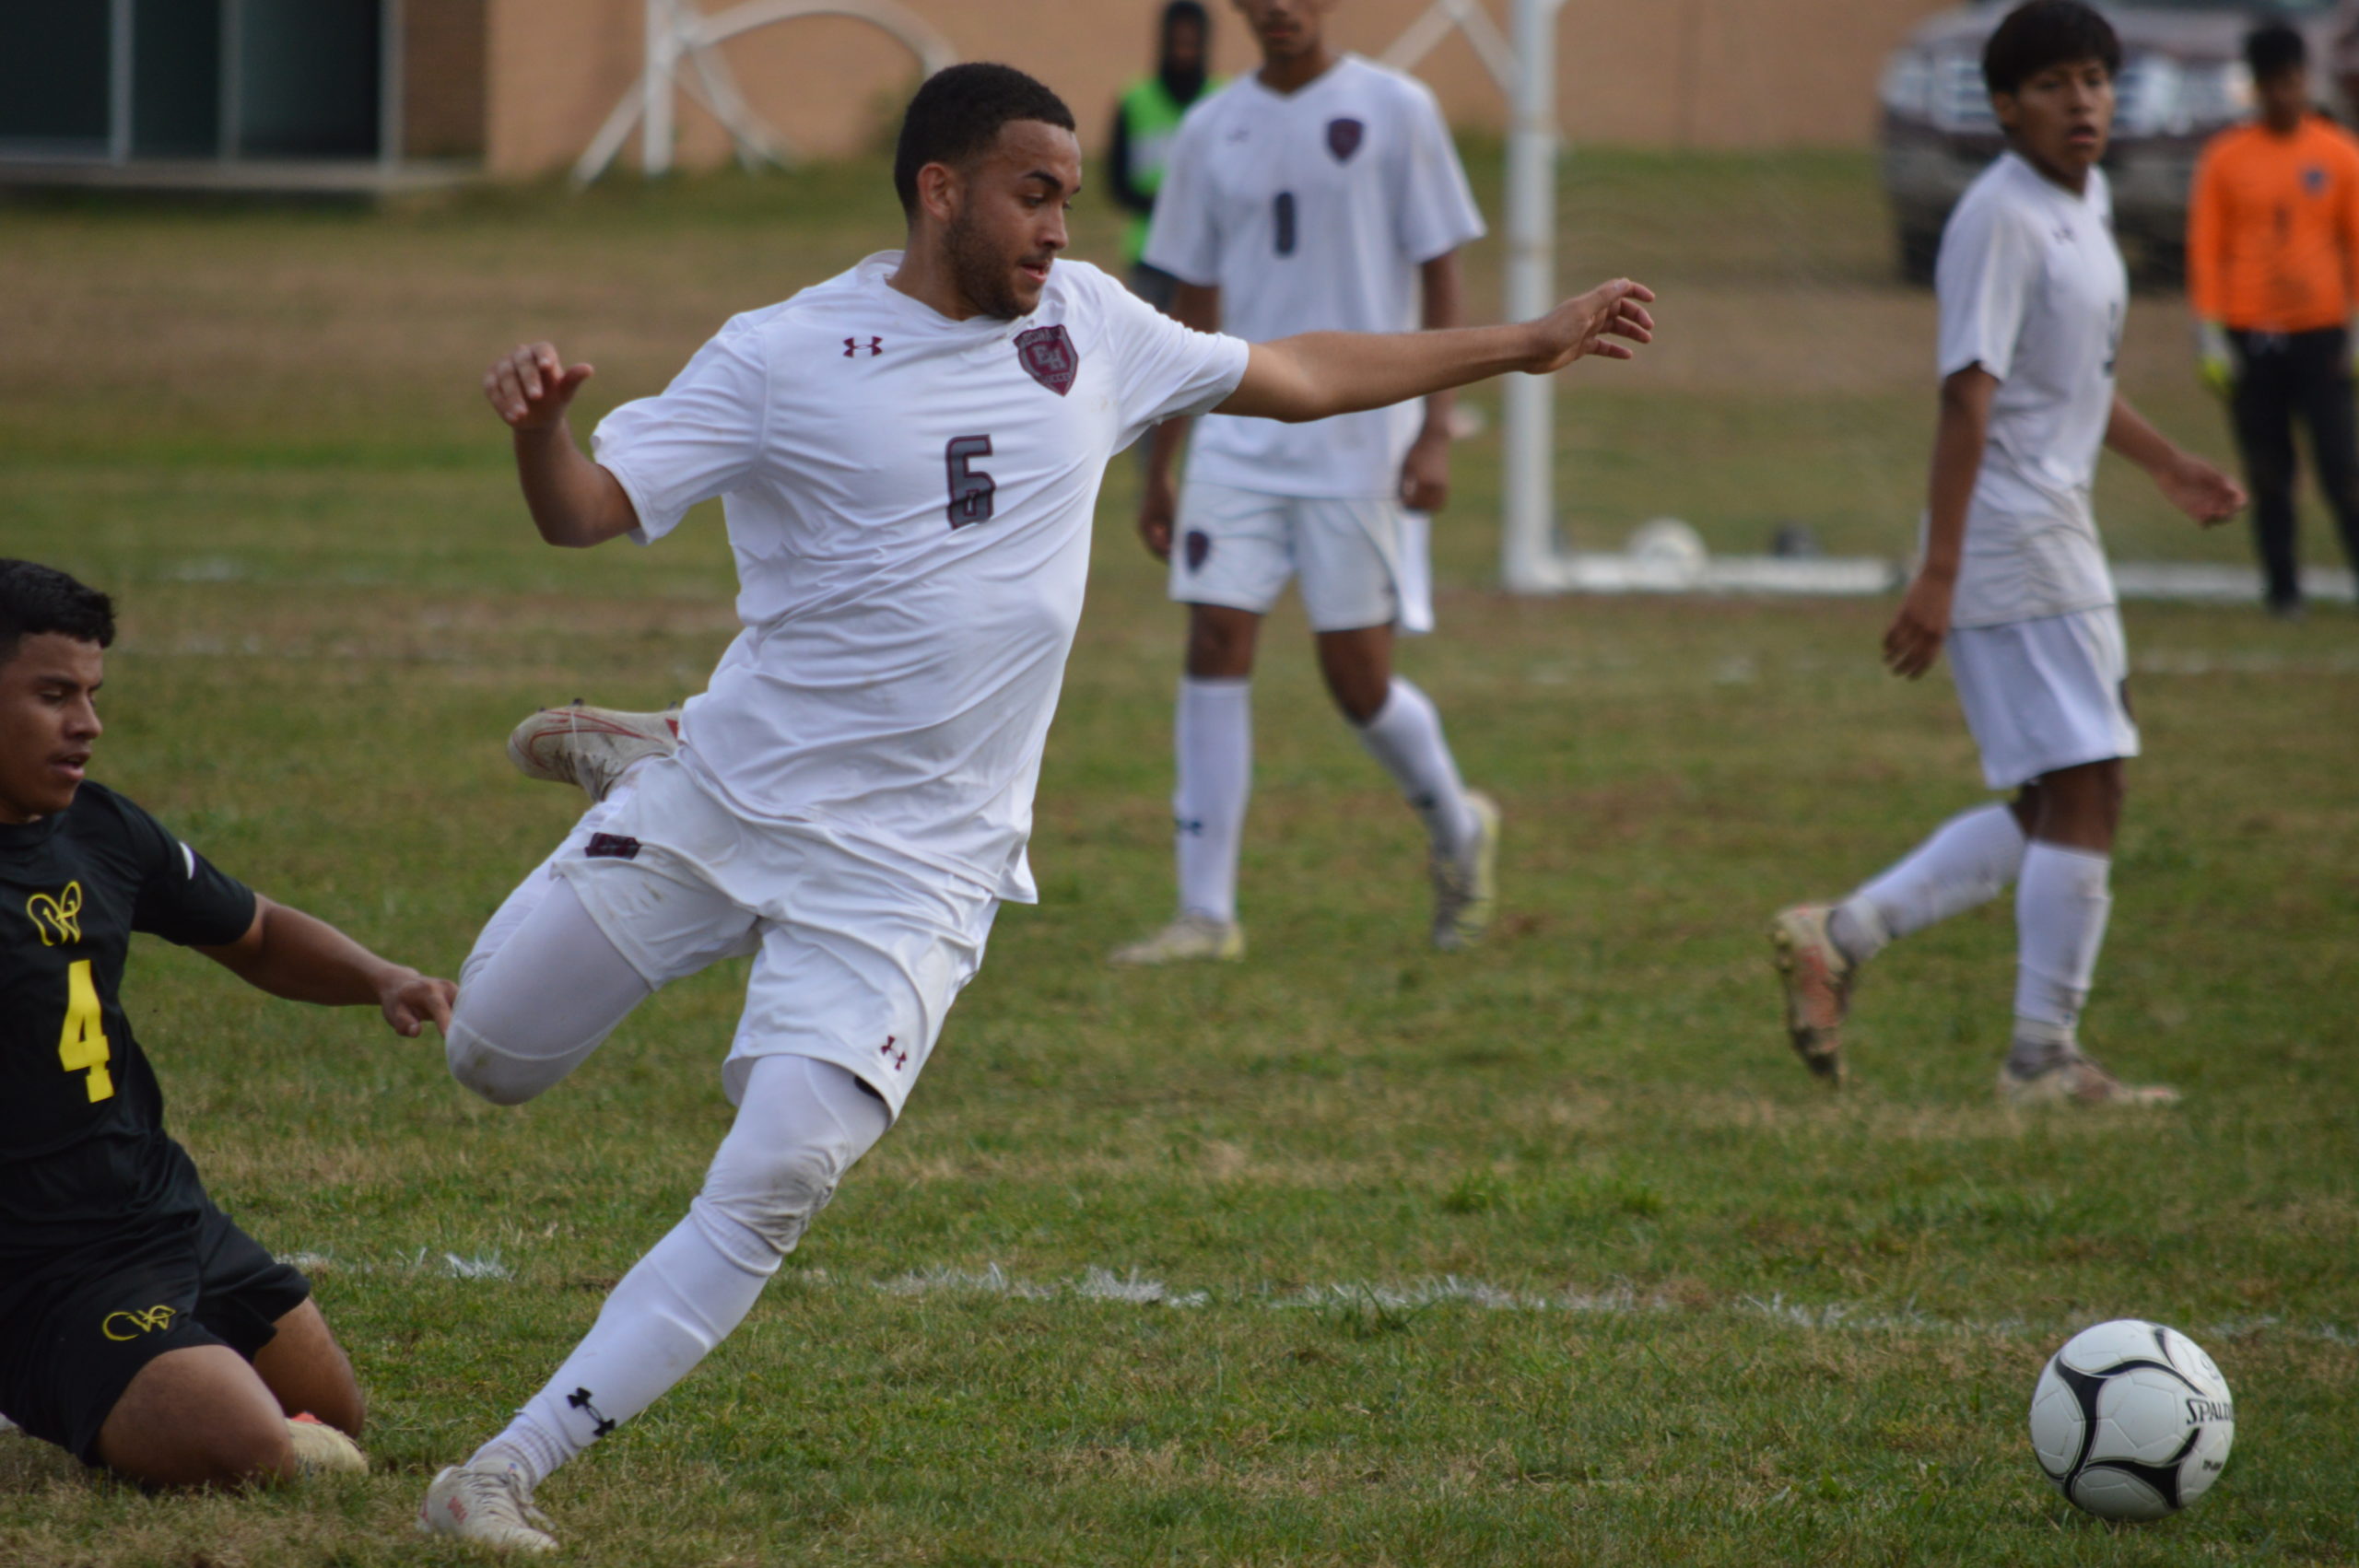 Manuel Ruiz, a senior, was the anchor of East Hampton’s defense, which struggled to contain a potent Wyandanch attack on Monday in the opening round of the Suffolk County Class A playoffs. The Warriors won, 5-0, to advance to the quarterfinals.